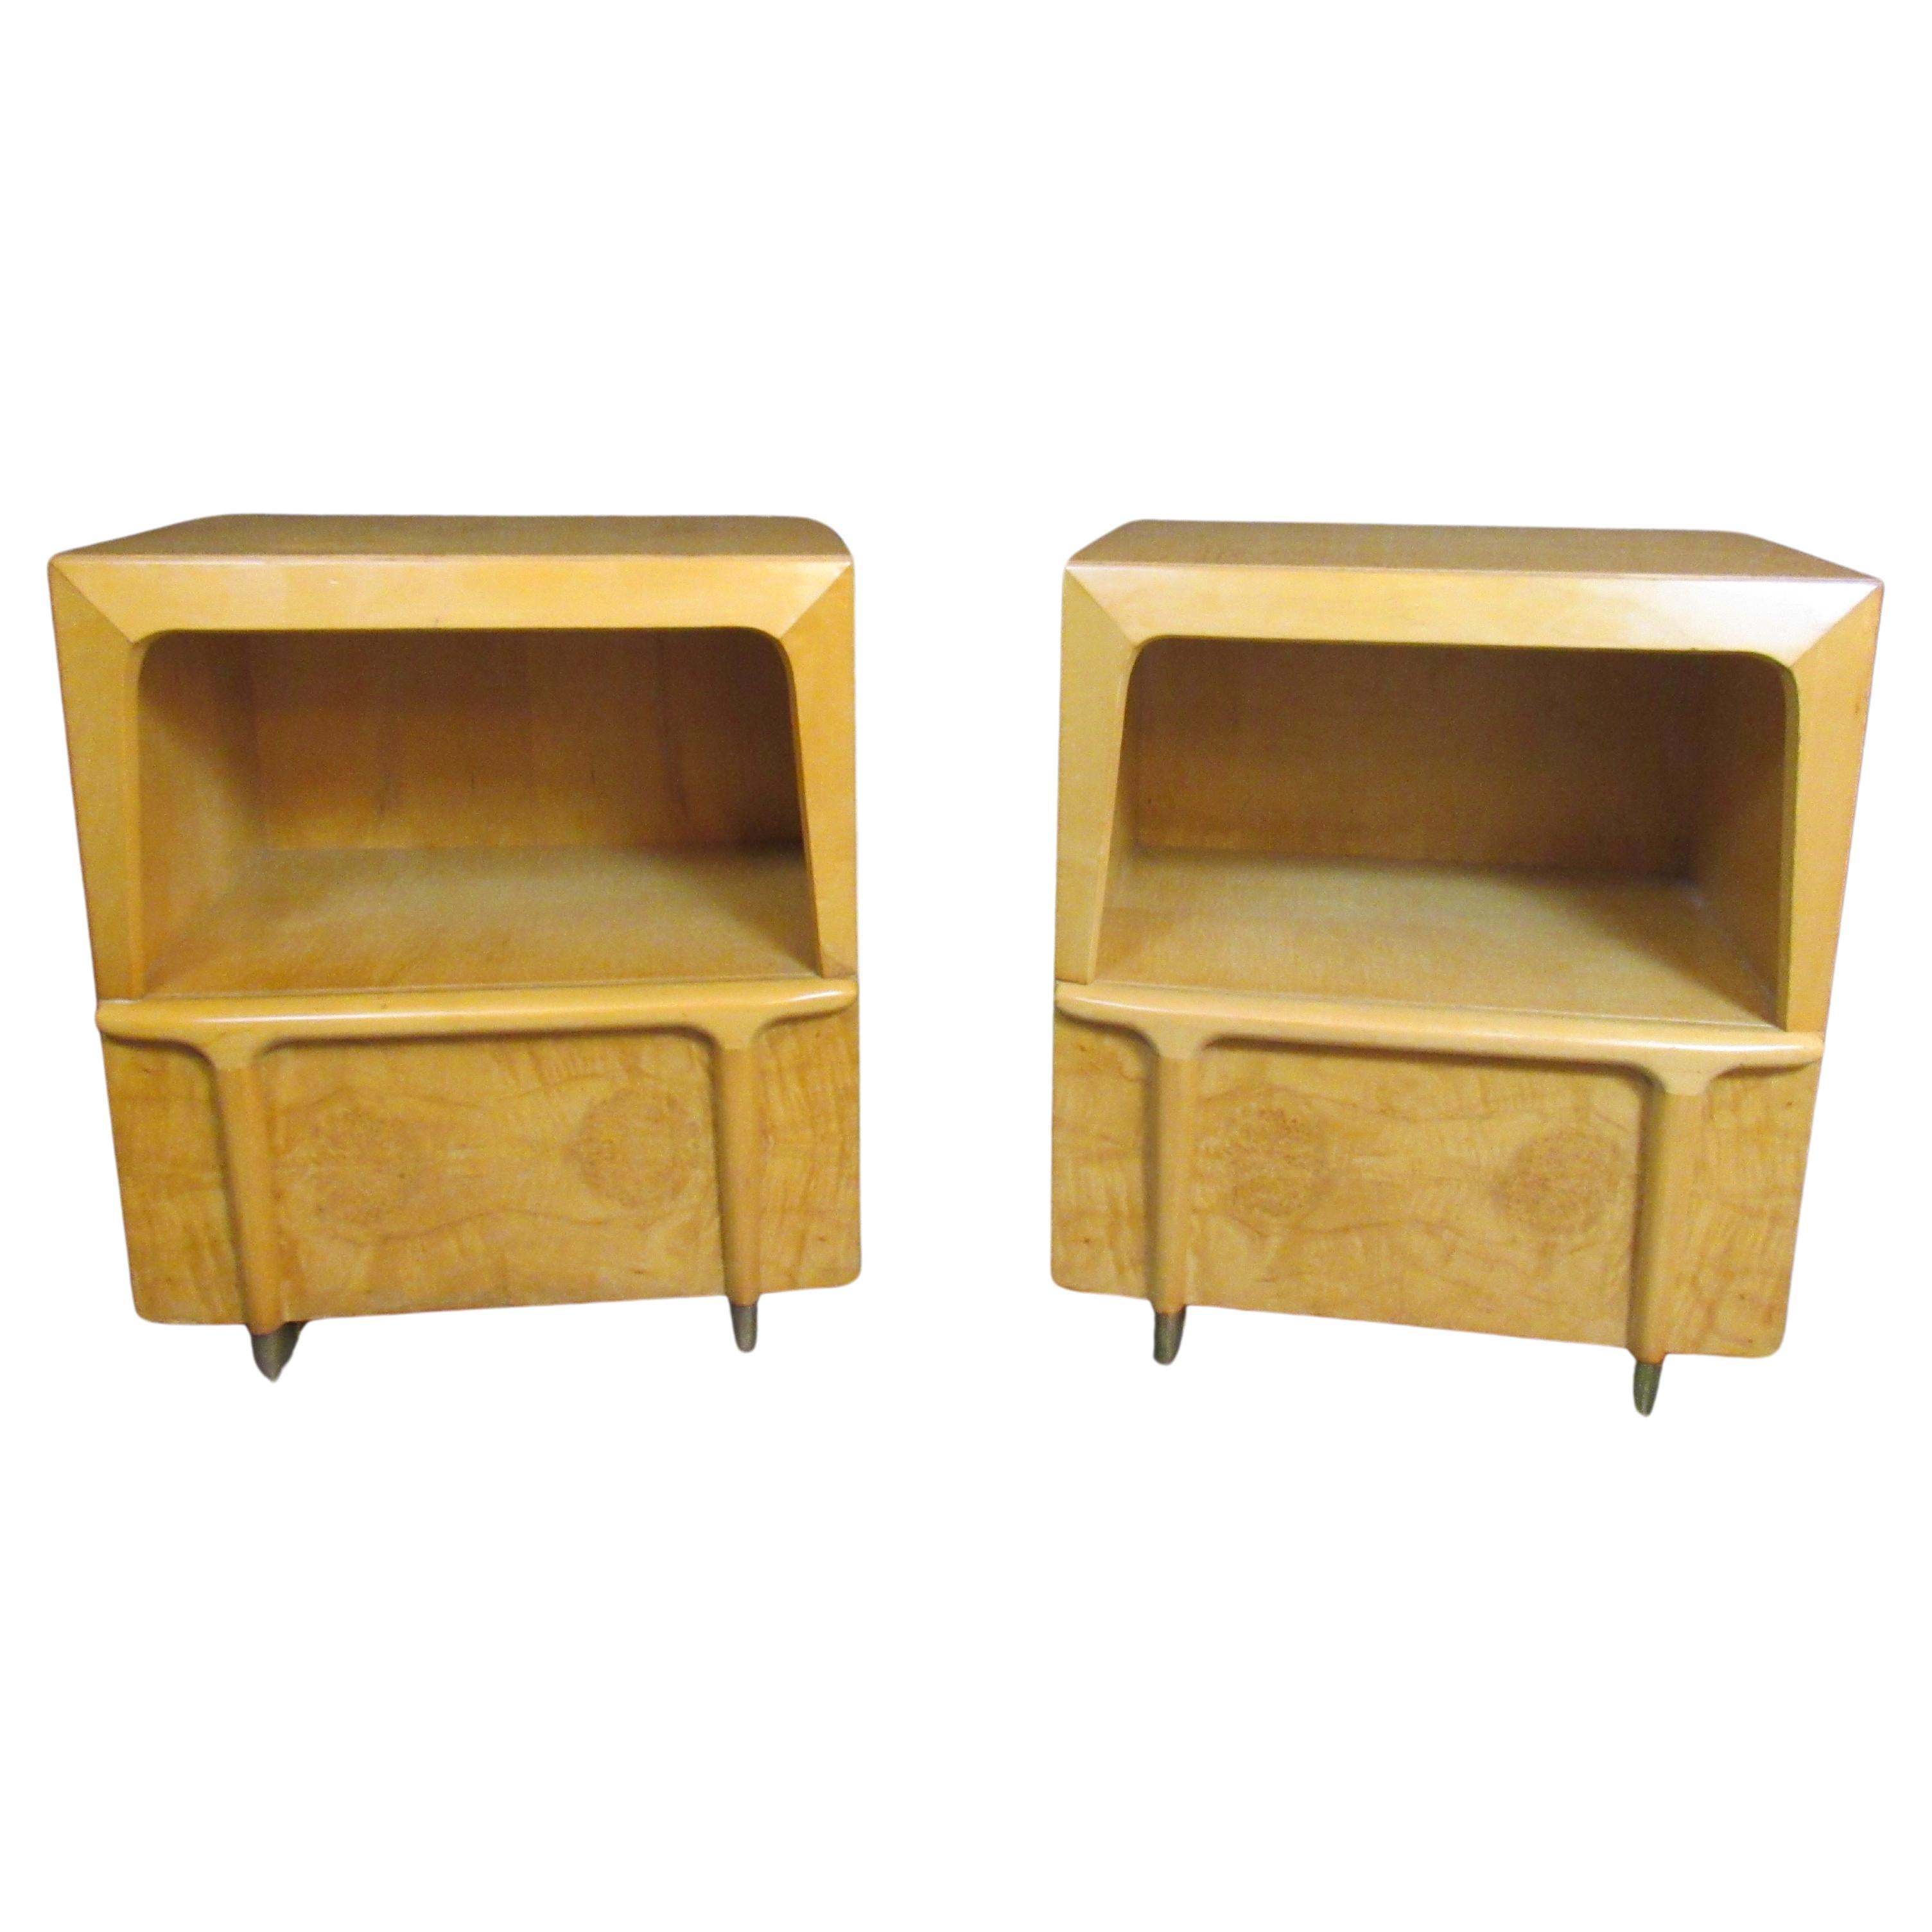 Burled Maple and Brass Nightstands after Heywood Wakefield For Sale